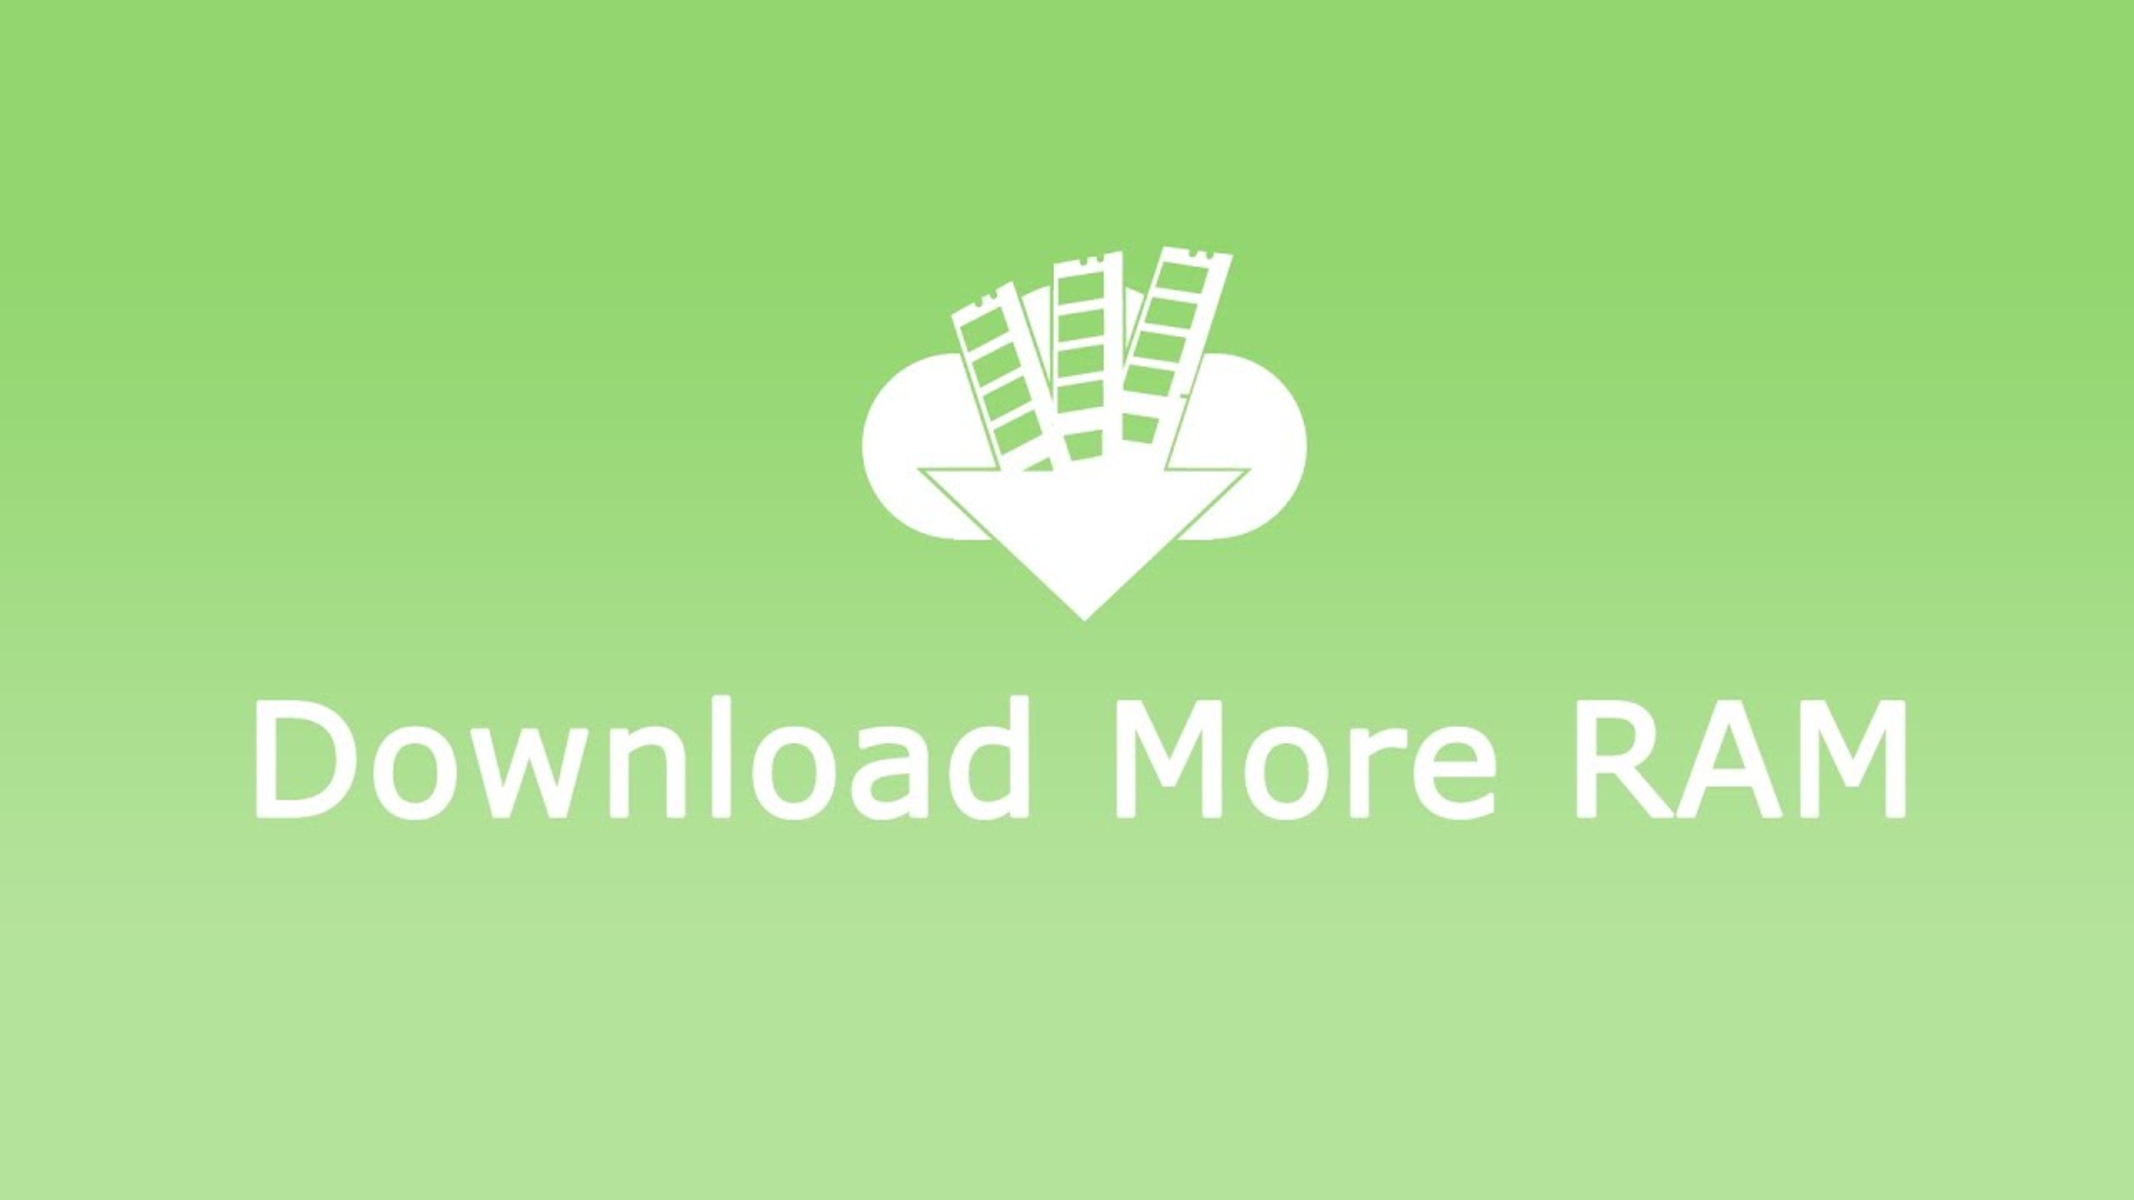 How To Download More RAM For Free